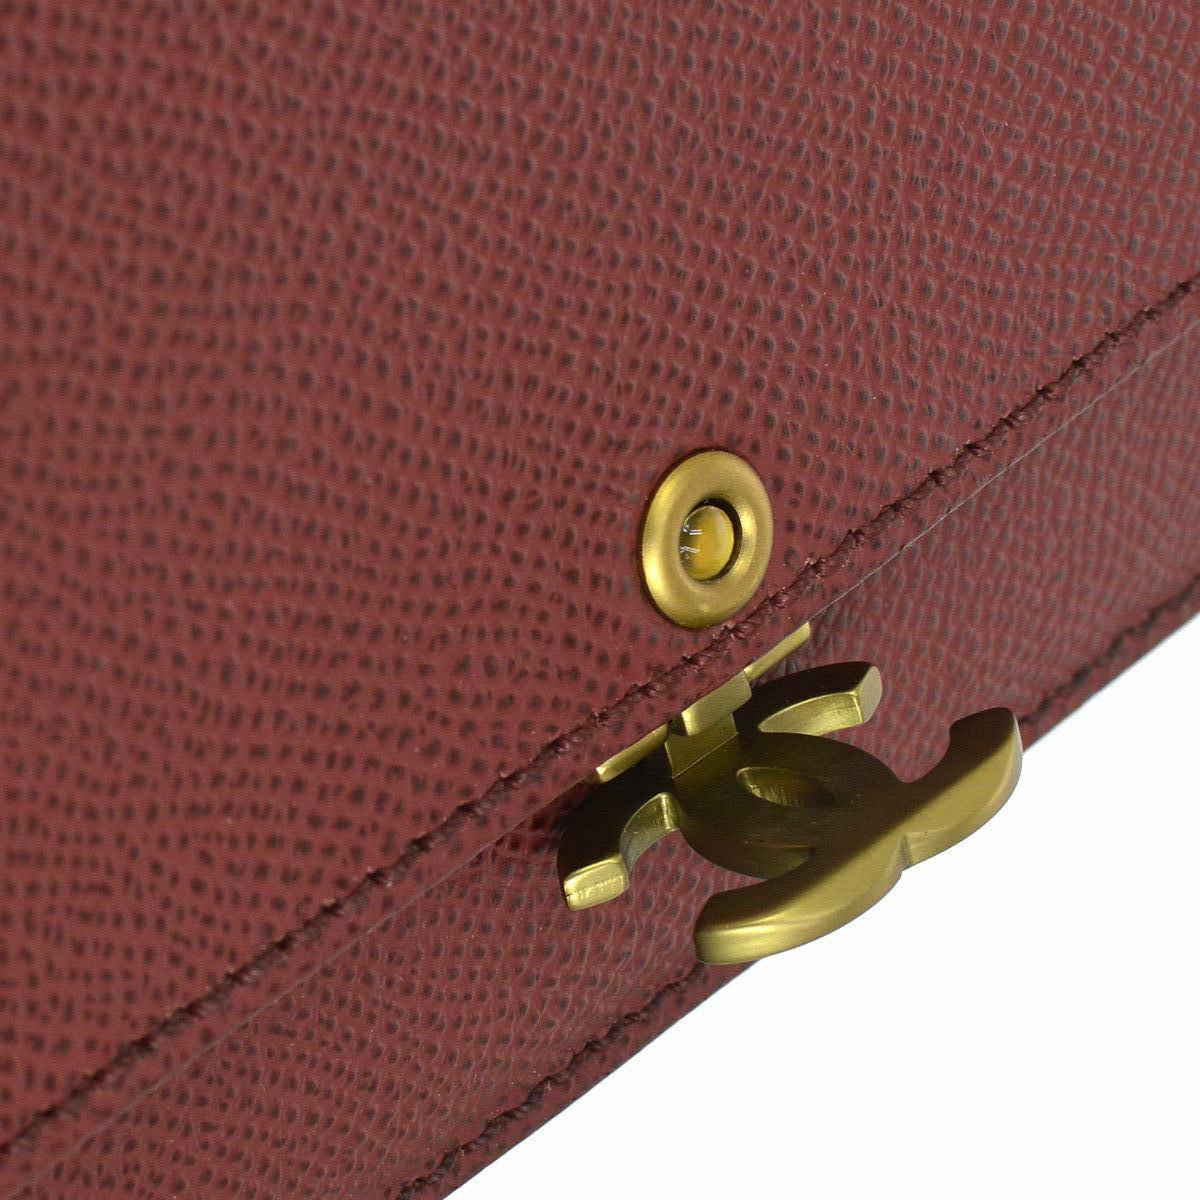 Chanel Burgundy Red Leather Gold Wallet on Chain WOC Evening Shoulder Flap Bag

Caviar Leather
Gold tone hardware
Flip lock closure
Leather lining
Date code present
Shoulder strap 25